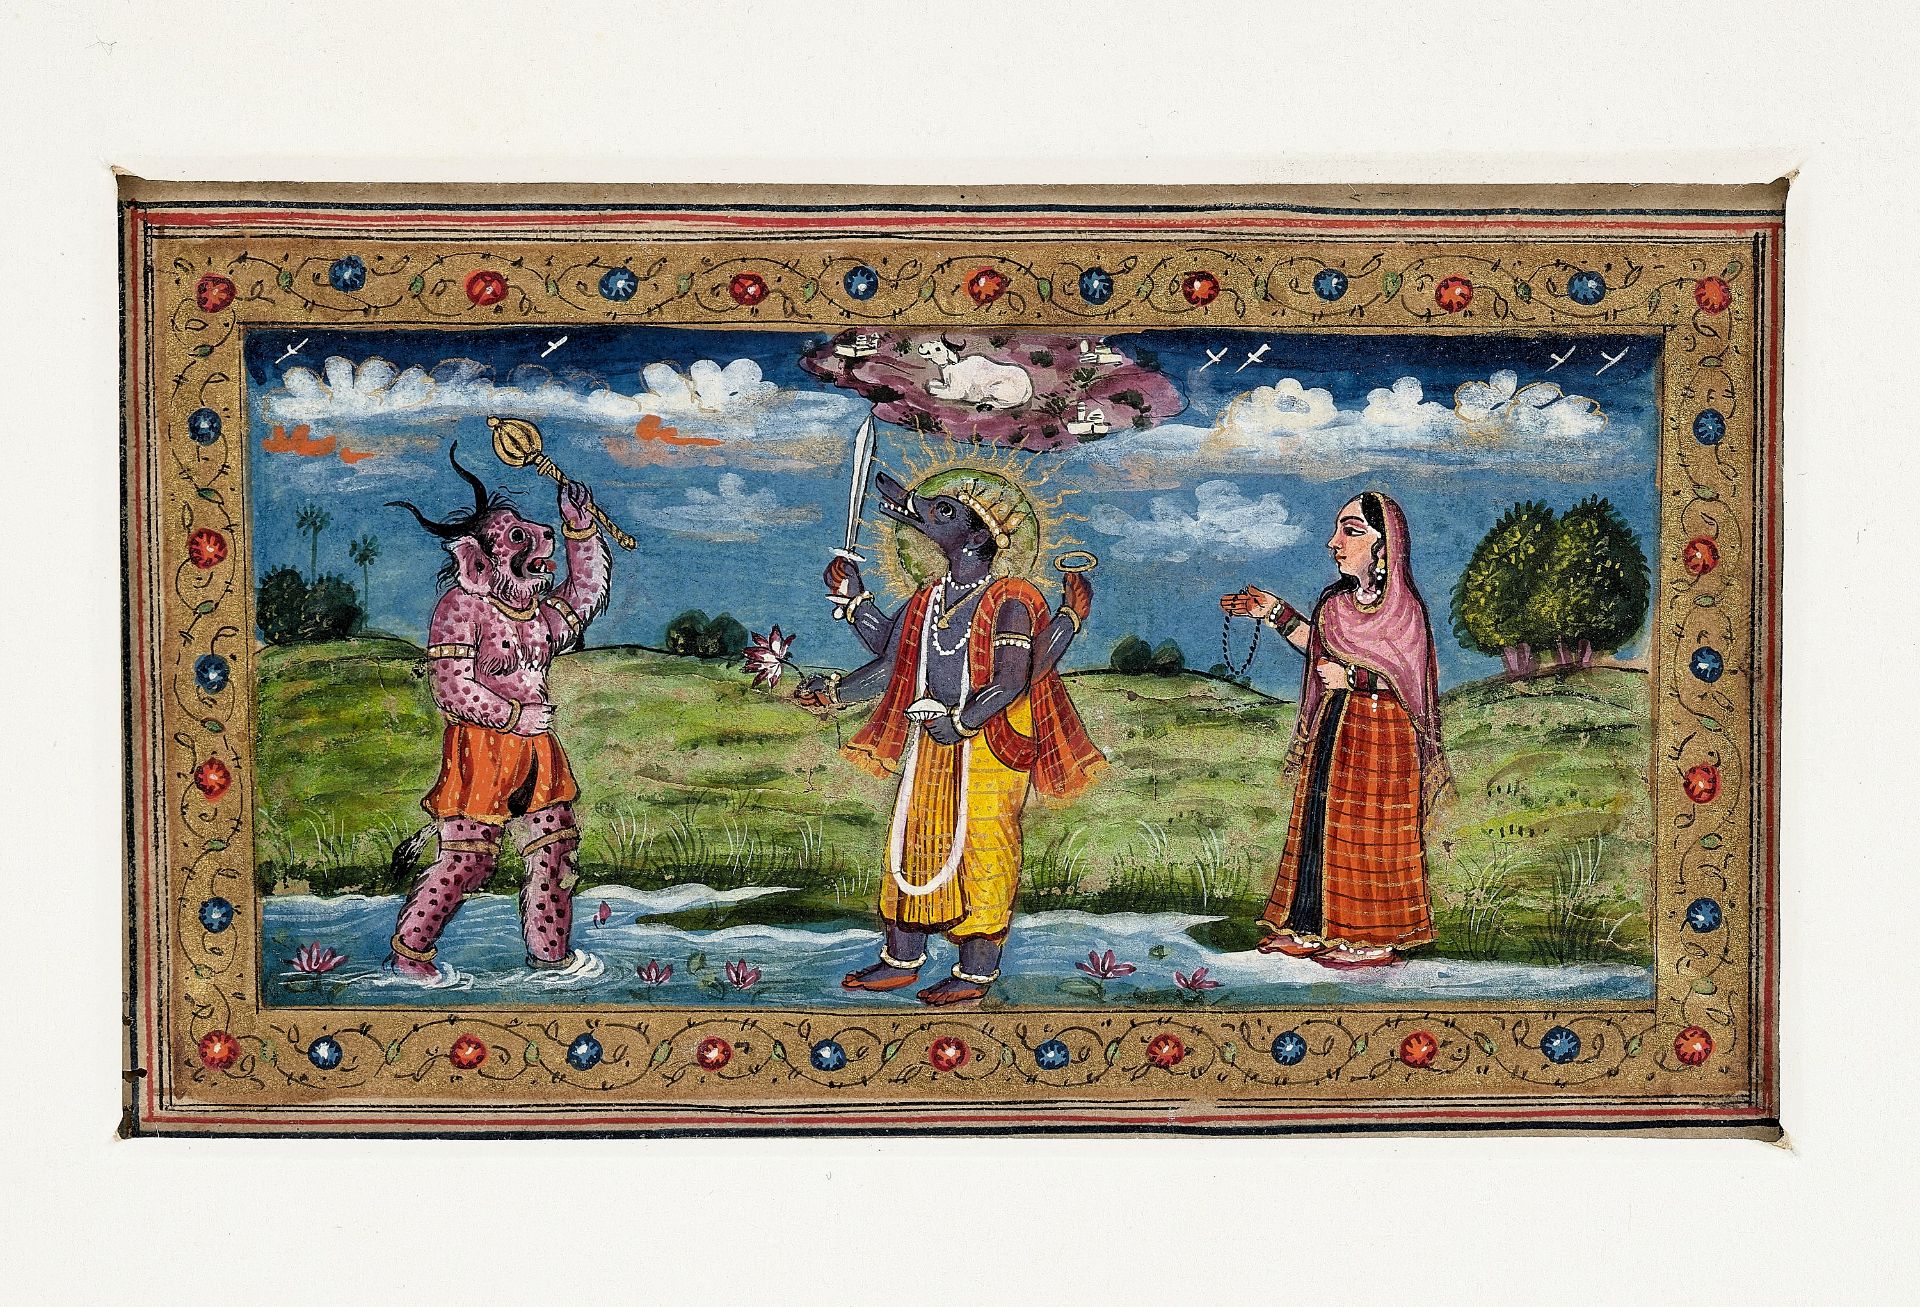 A RARE GROUP OF 27 FOLIOS FROM A MANUSCRIPT, KASHMIR 18TH CENTURY - Image 5 of 15